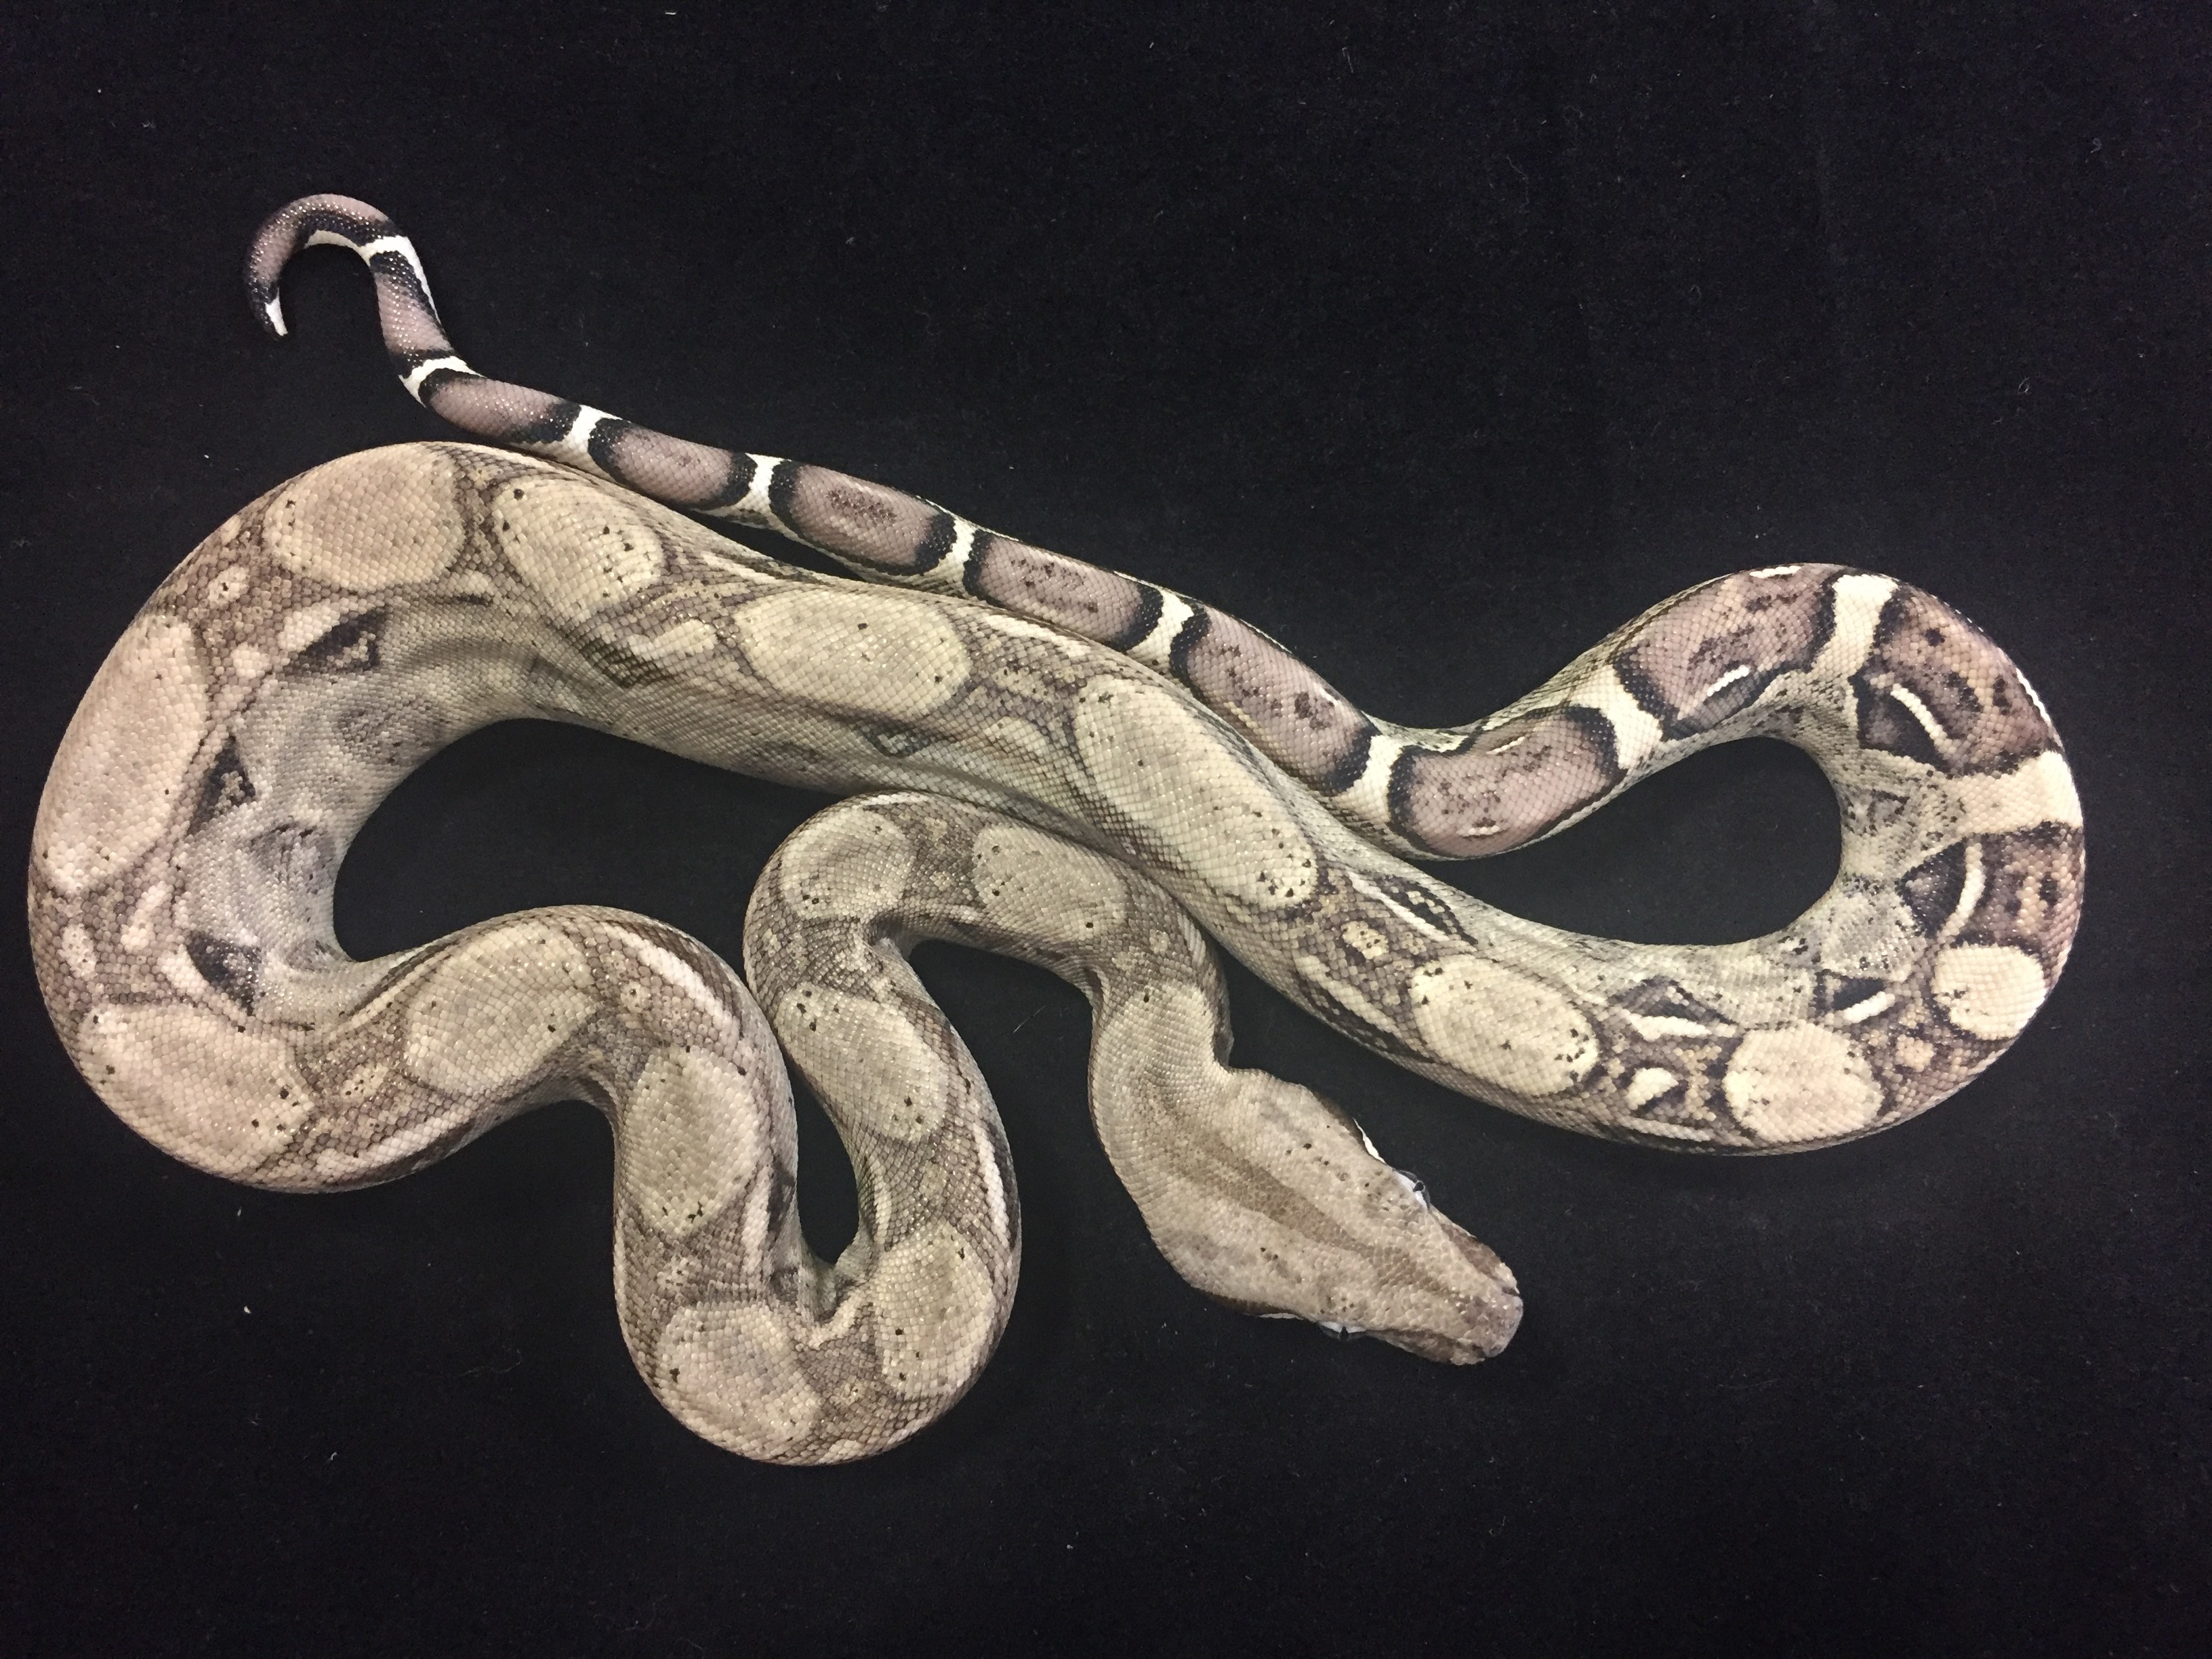 Anery Boa Constrictor by John Chausmer Reptiles